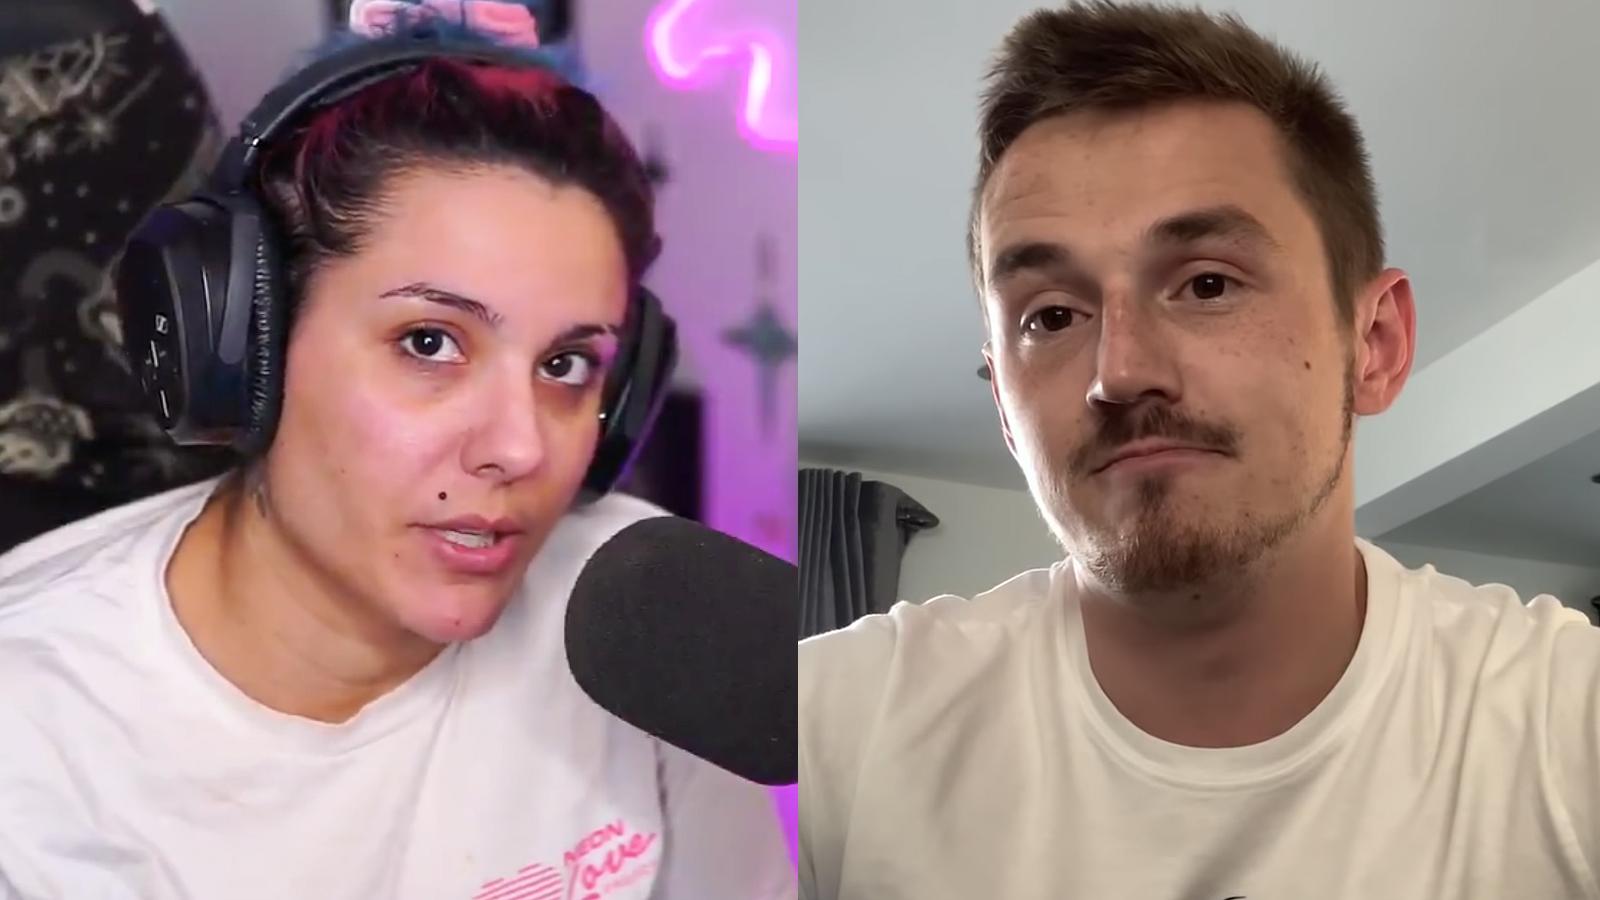 ZombiUnicorn and ProSyndicate looking at the camera